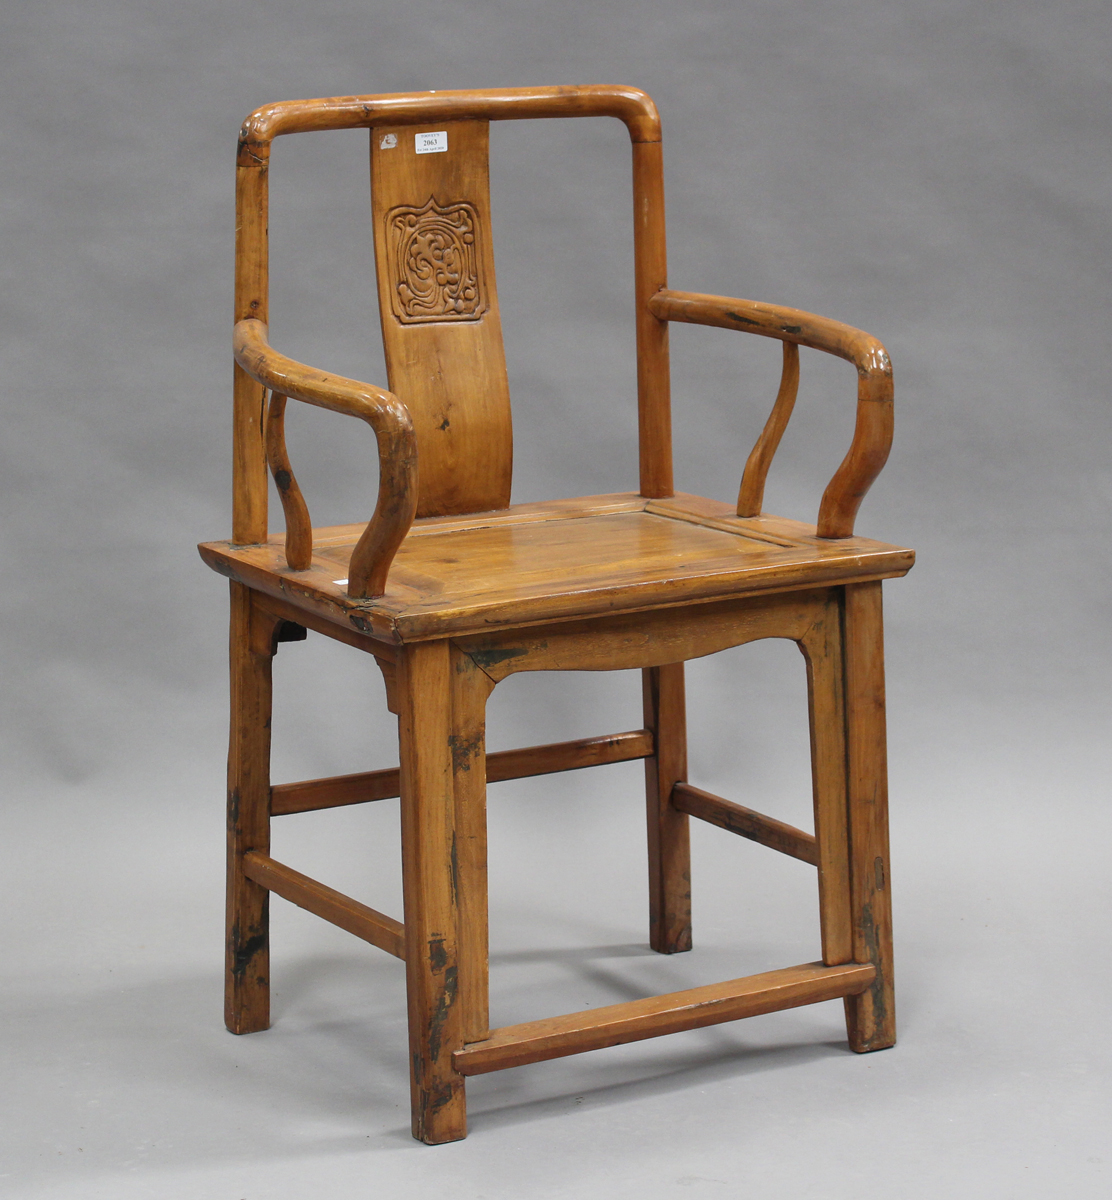 A 20th century Chinese softwood elbow chair with a carved splat back and panelled seat, on block